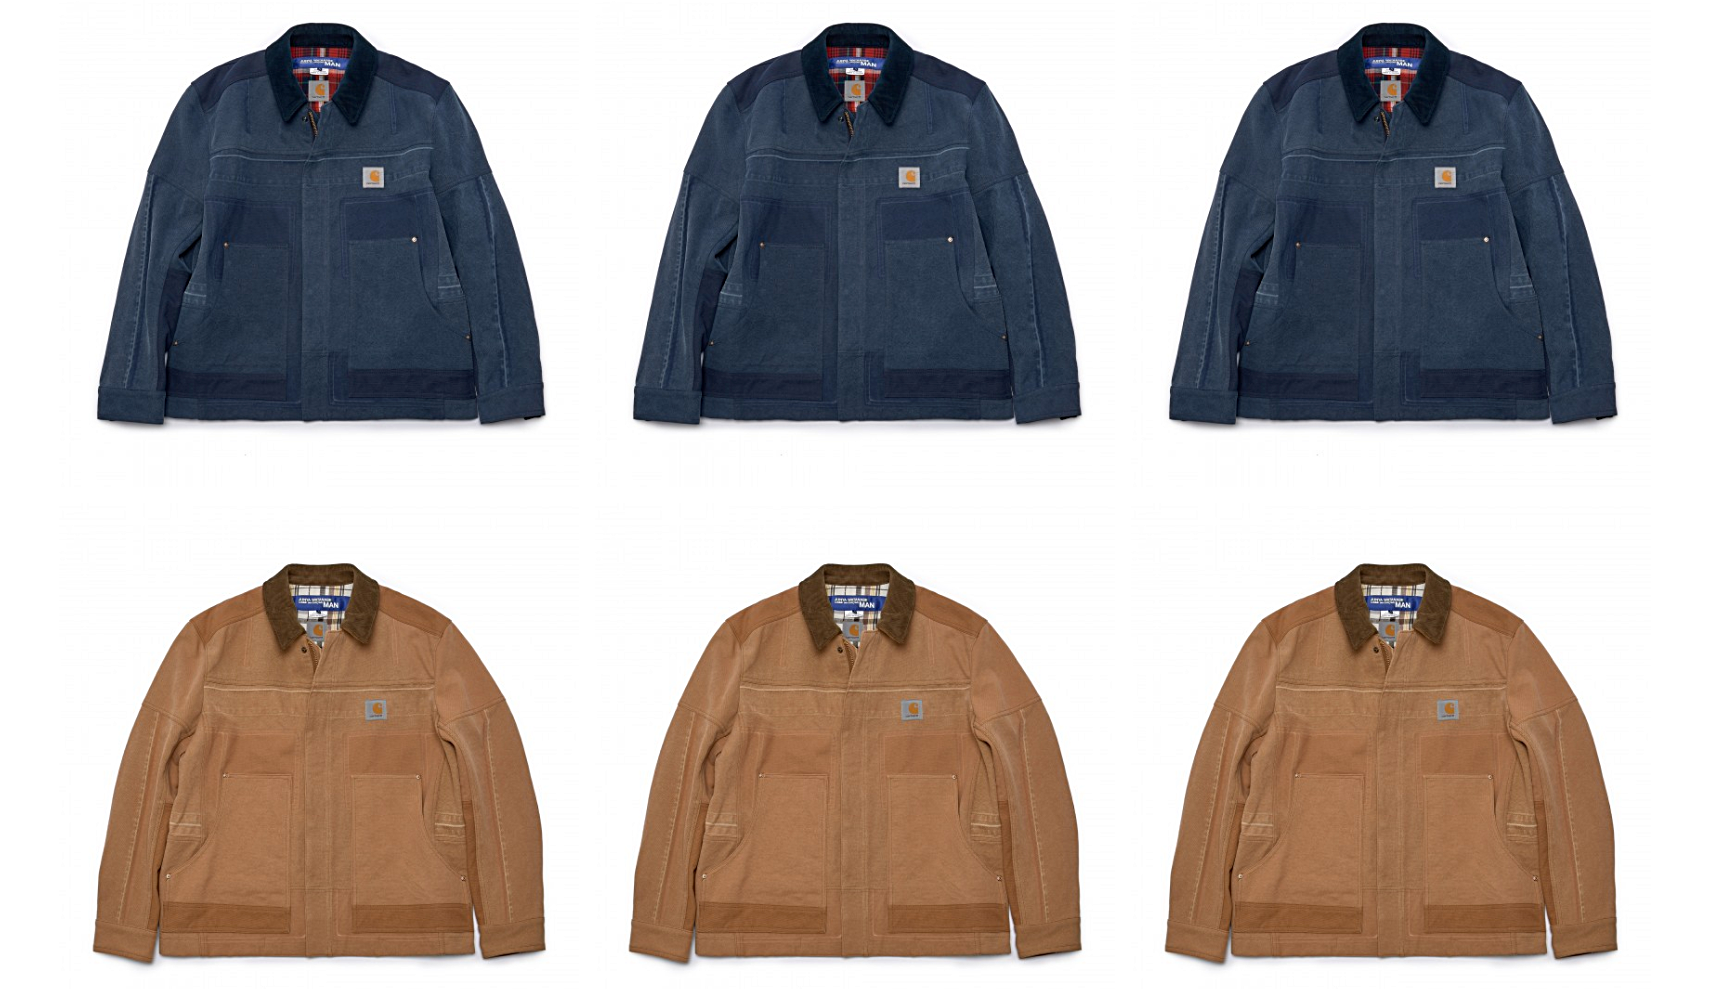 Junya Watanabe MAN and Carhartt releases first items from it's